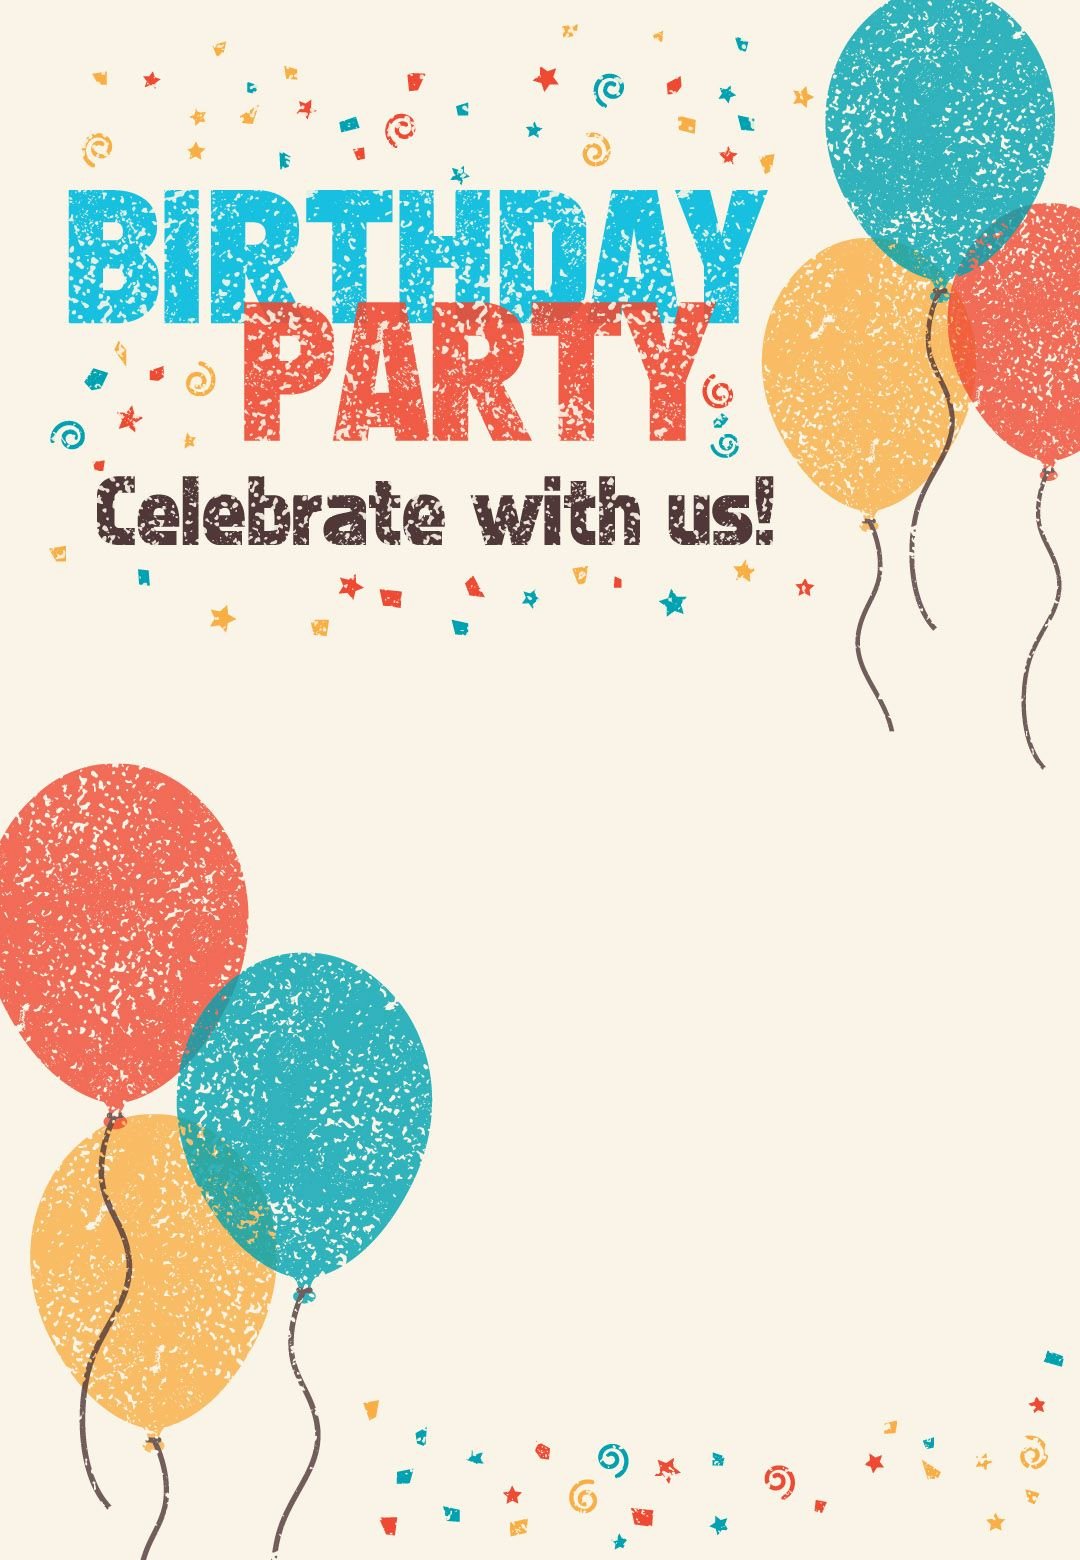 Free Happy Birthday Template Inspirational Free Printable Celebrate with Us Invitation Great Site